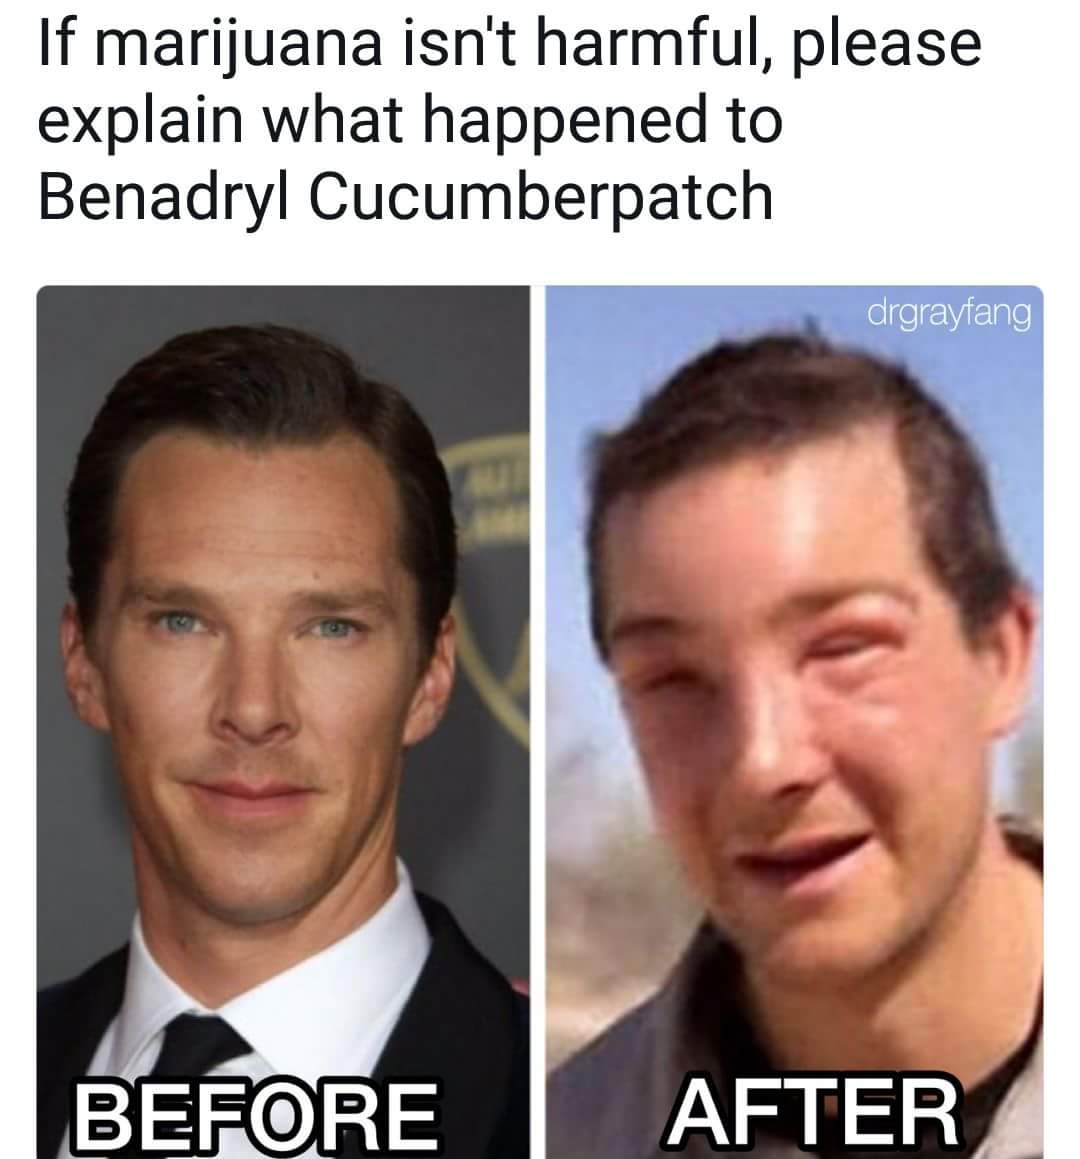 420 Meme about the dangers of smoking with example of how bad it was for Benadryl Cucumberpatch (Benedict Cumberbatch)